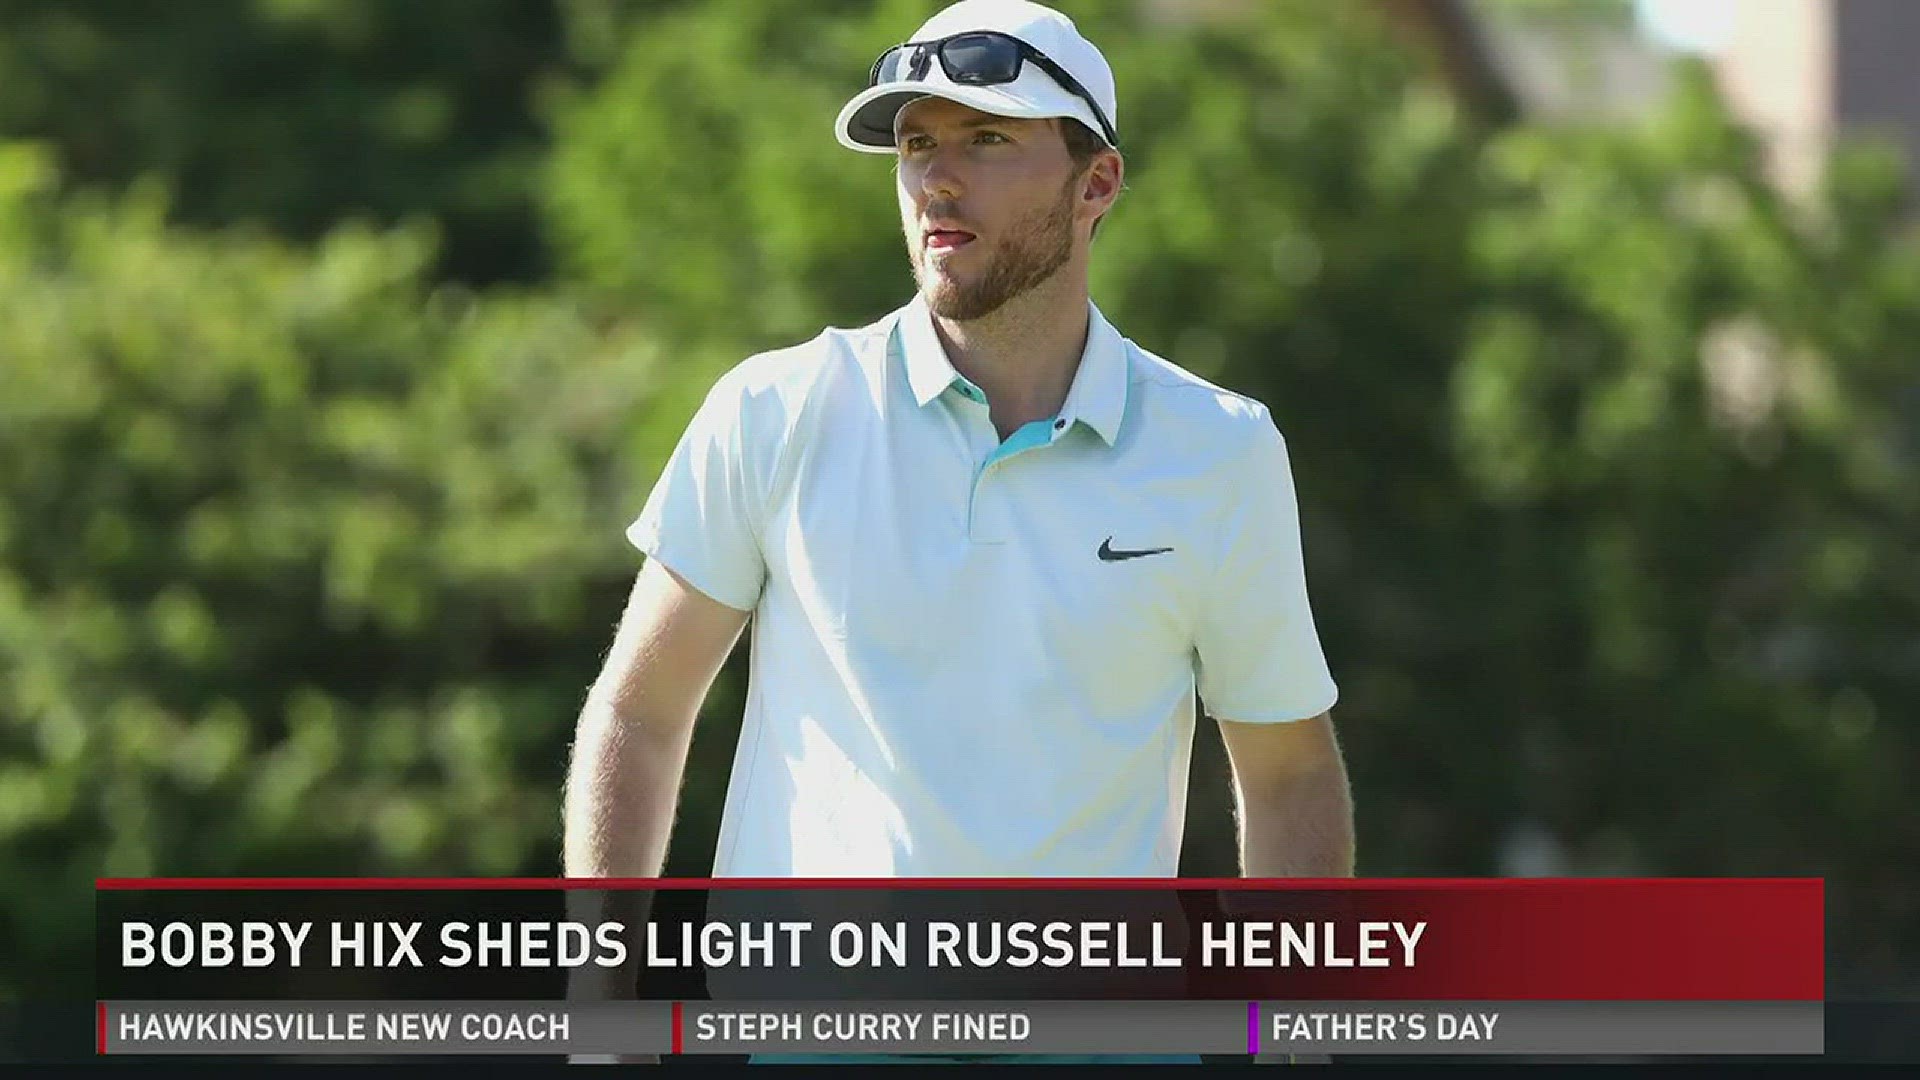 Bobby Hix sheds light on Russell Henley